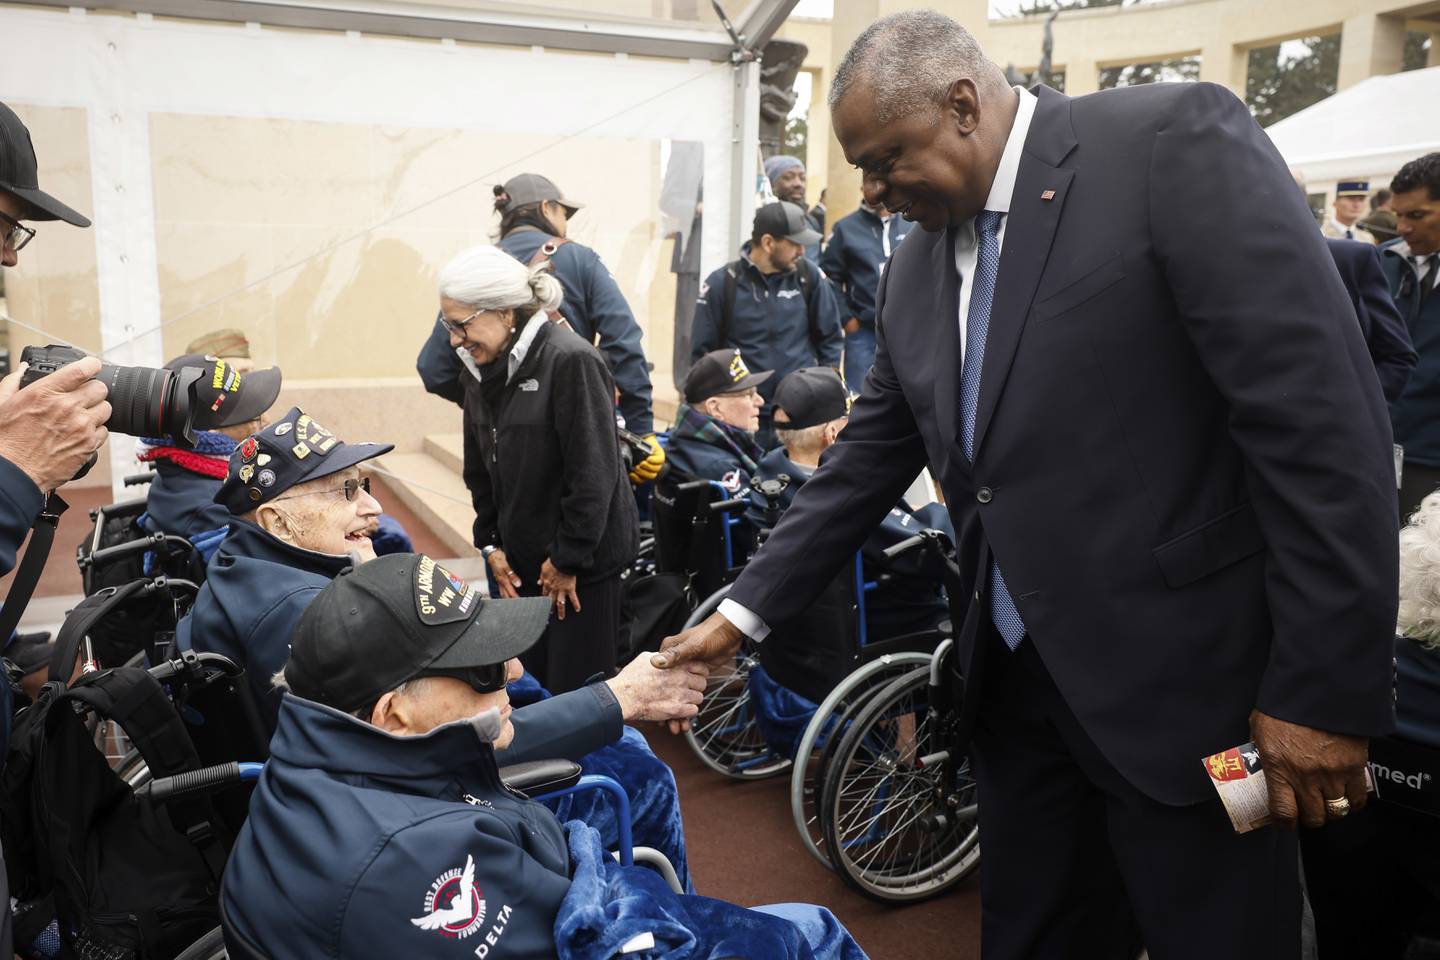 U.S. Defense Secretary Lloyd Austin, right, greet U.S war veterans during a ceremony to mark the 79th anniversary of the assault that led to the liberation of France and Western Europe from Nazi control, at the American Cemetery in Colleville-sur-Mer, Normandy, France, Tuesday, June 6, 2023.